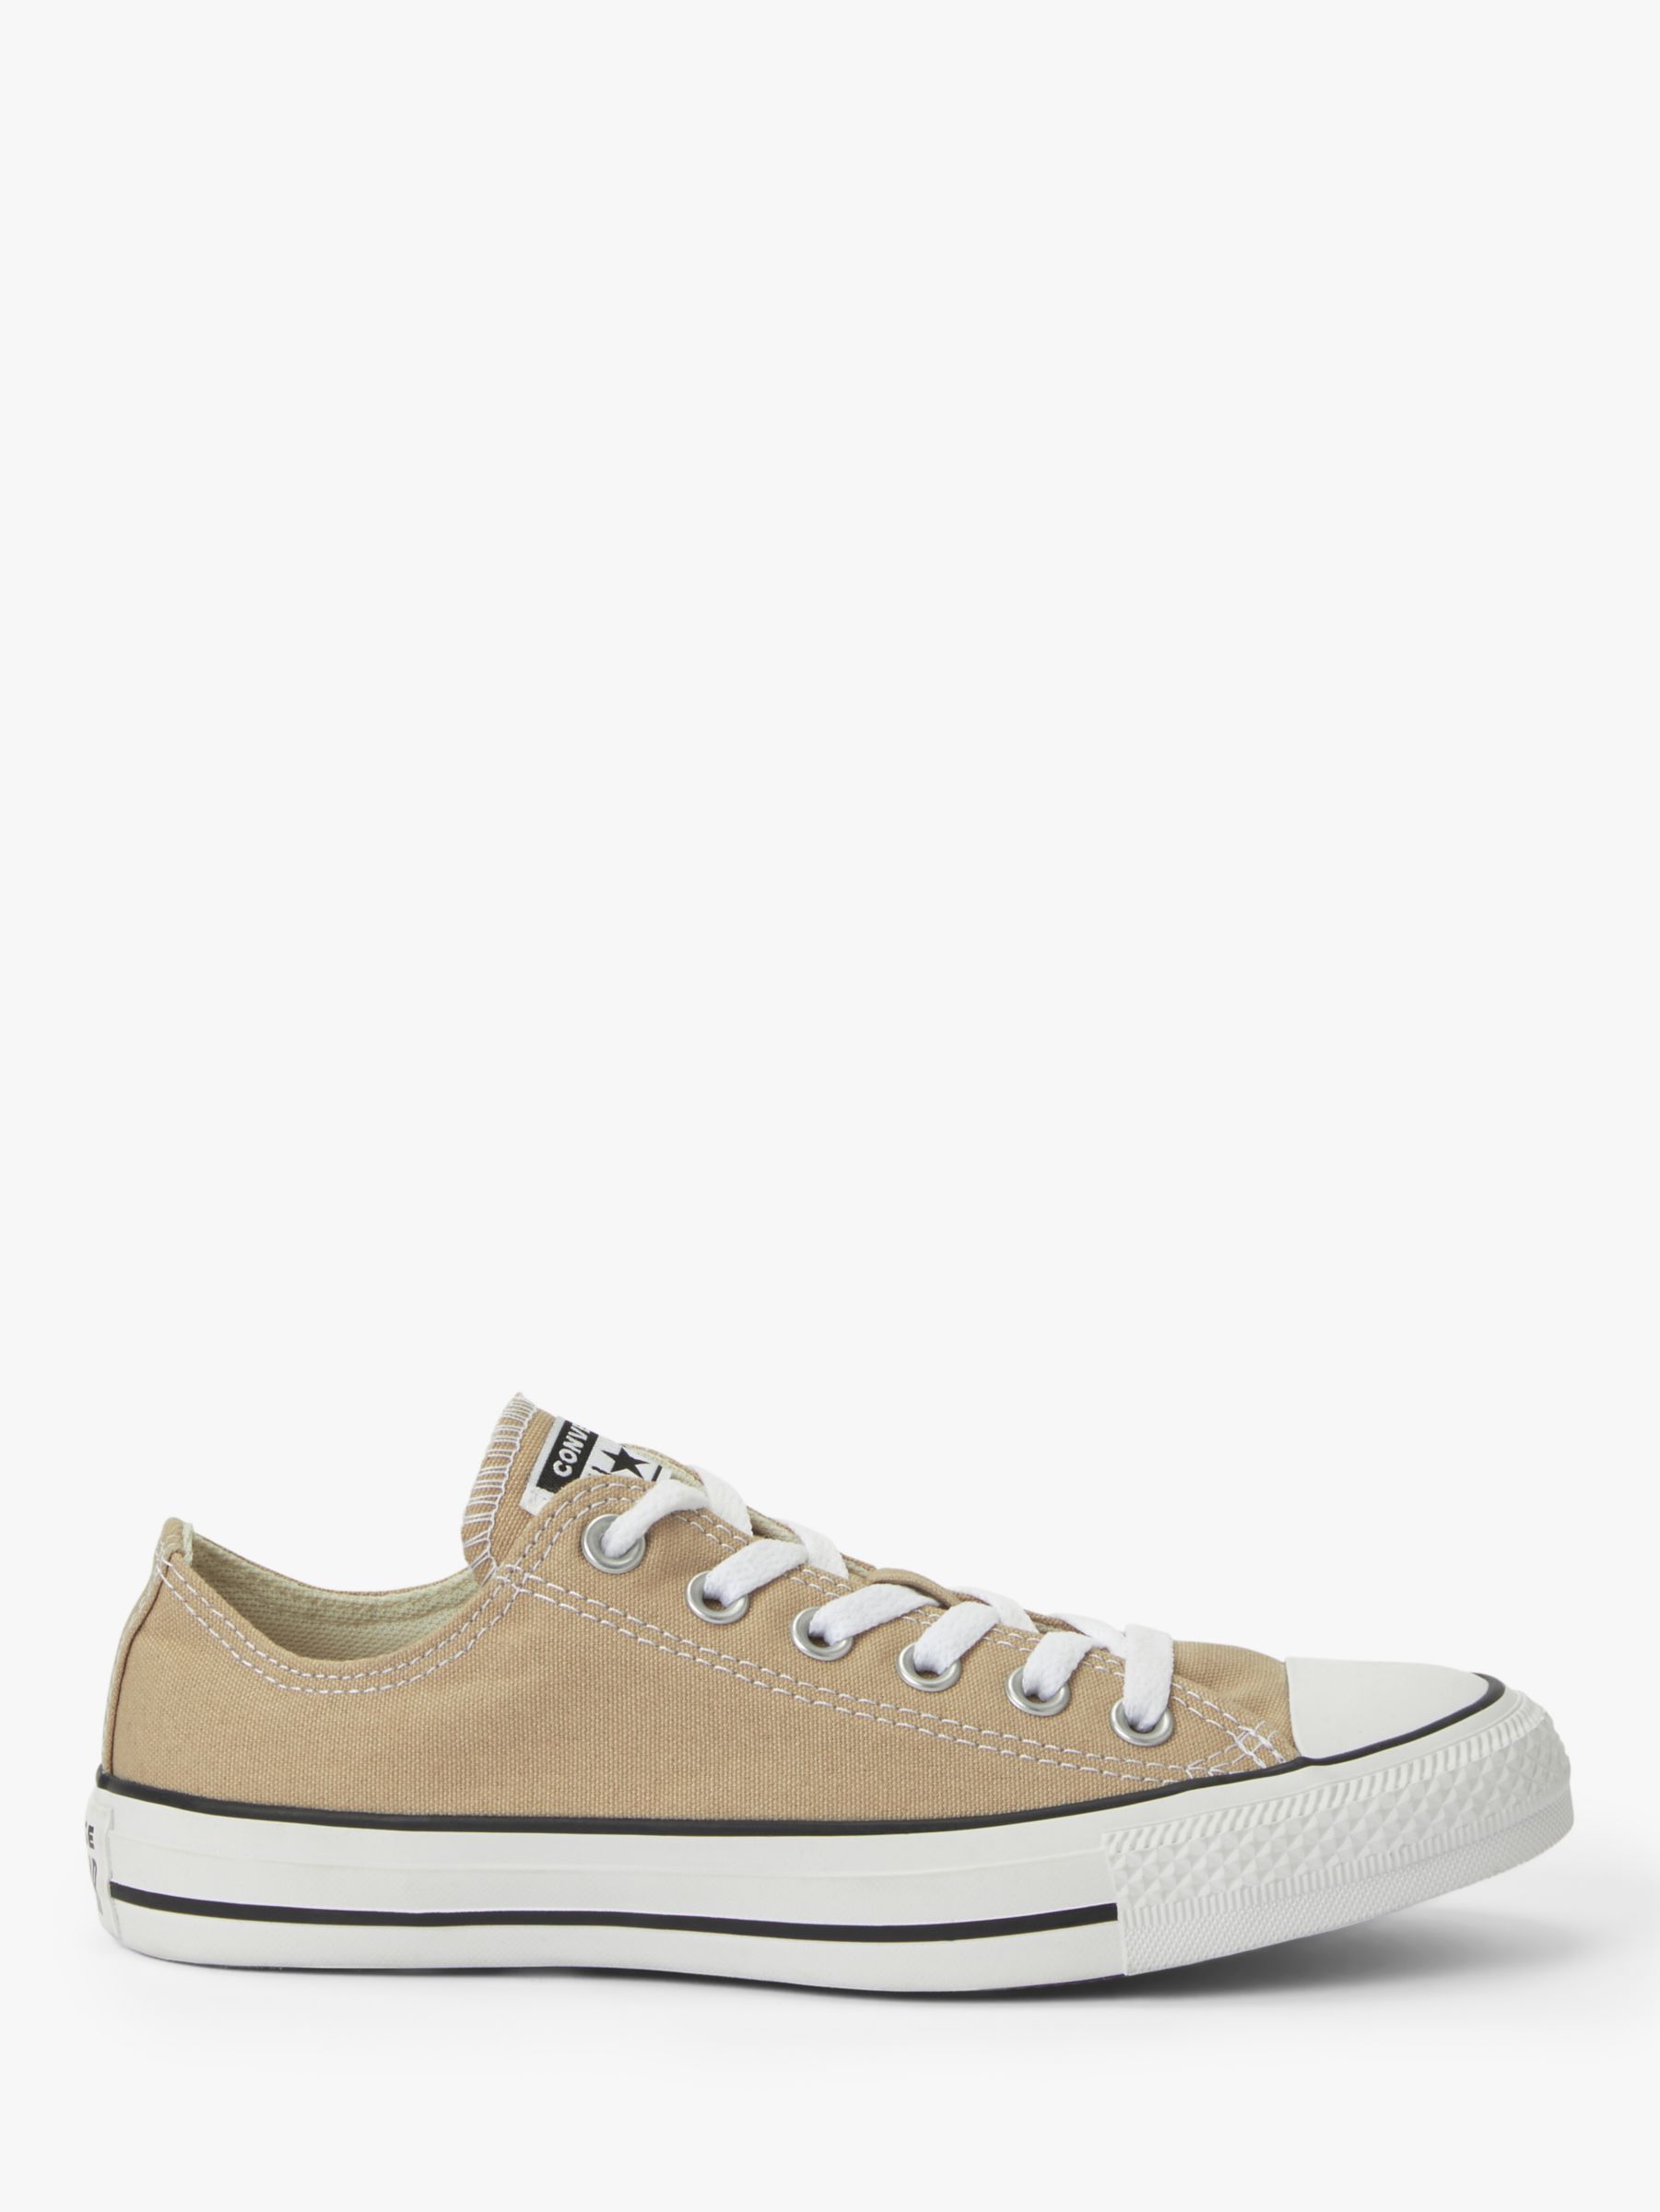 converse chuck taylor classic boot ox